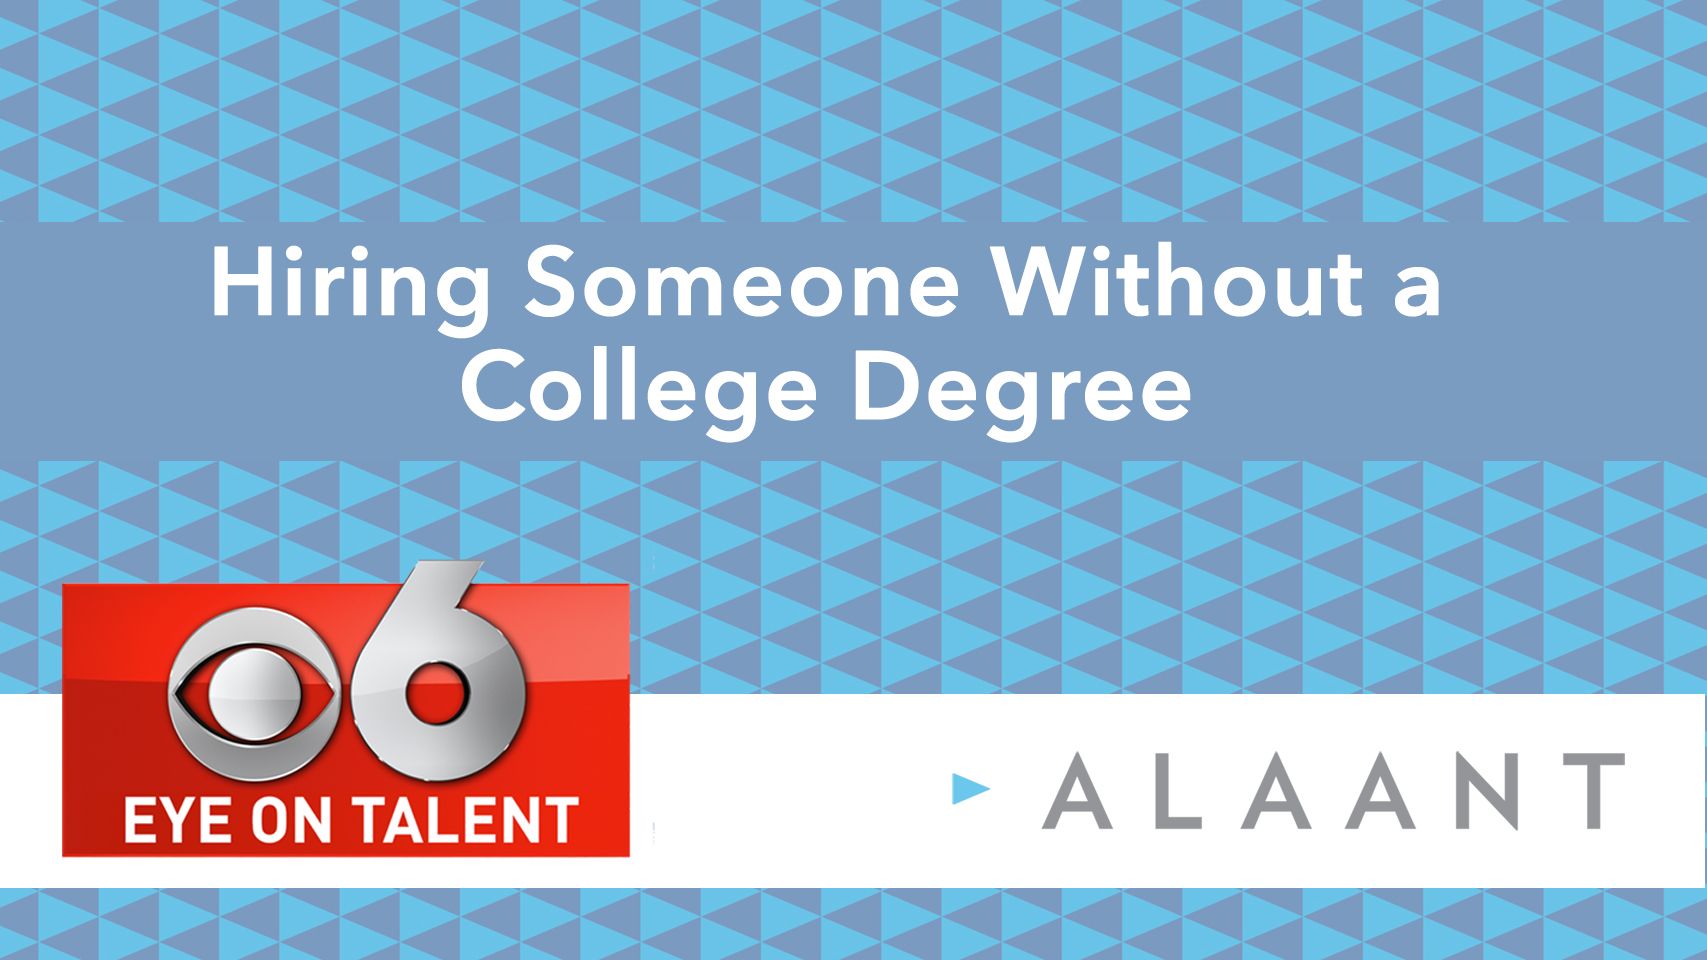 Alaant Eye on Talent: Hiring Someone Without a College Degree